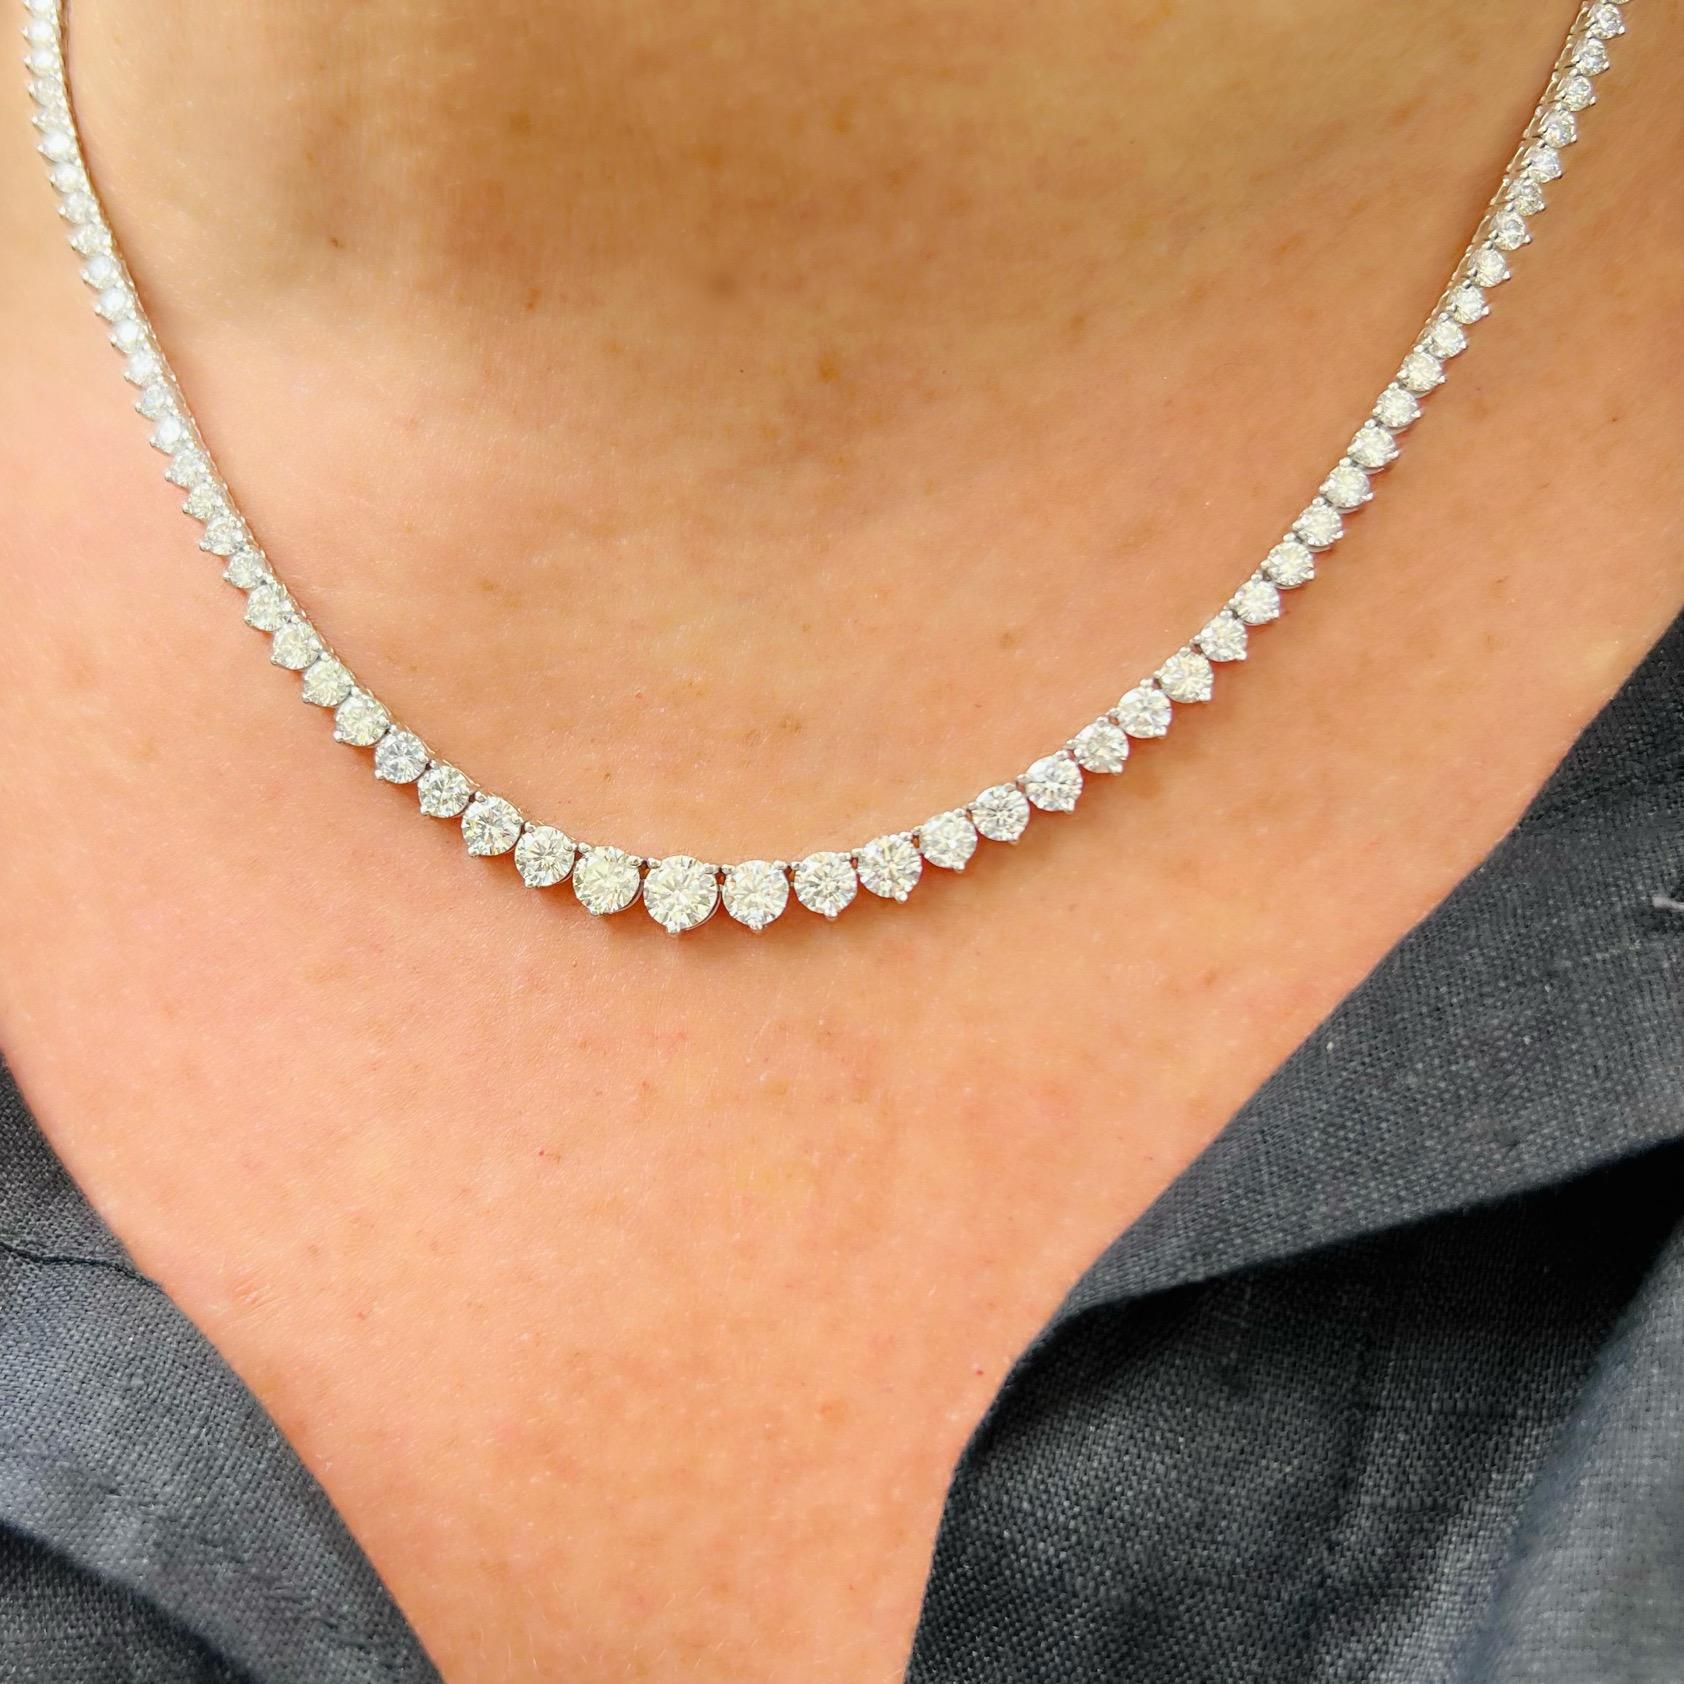 Stunning 18kt Graduated Diamond Line Necklace In Excellent Condition For Sale In San Francisco, CA